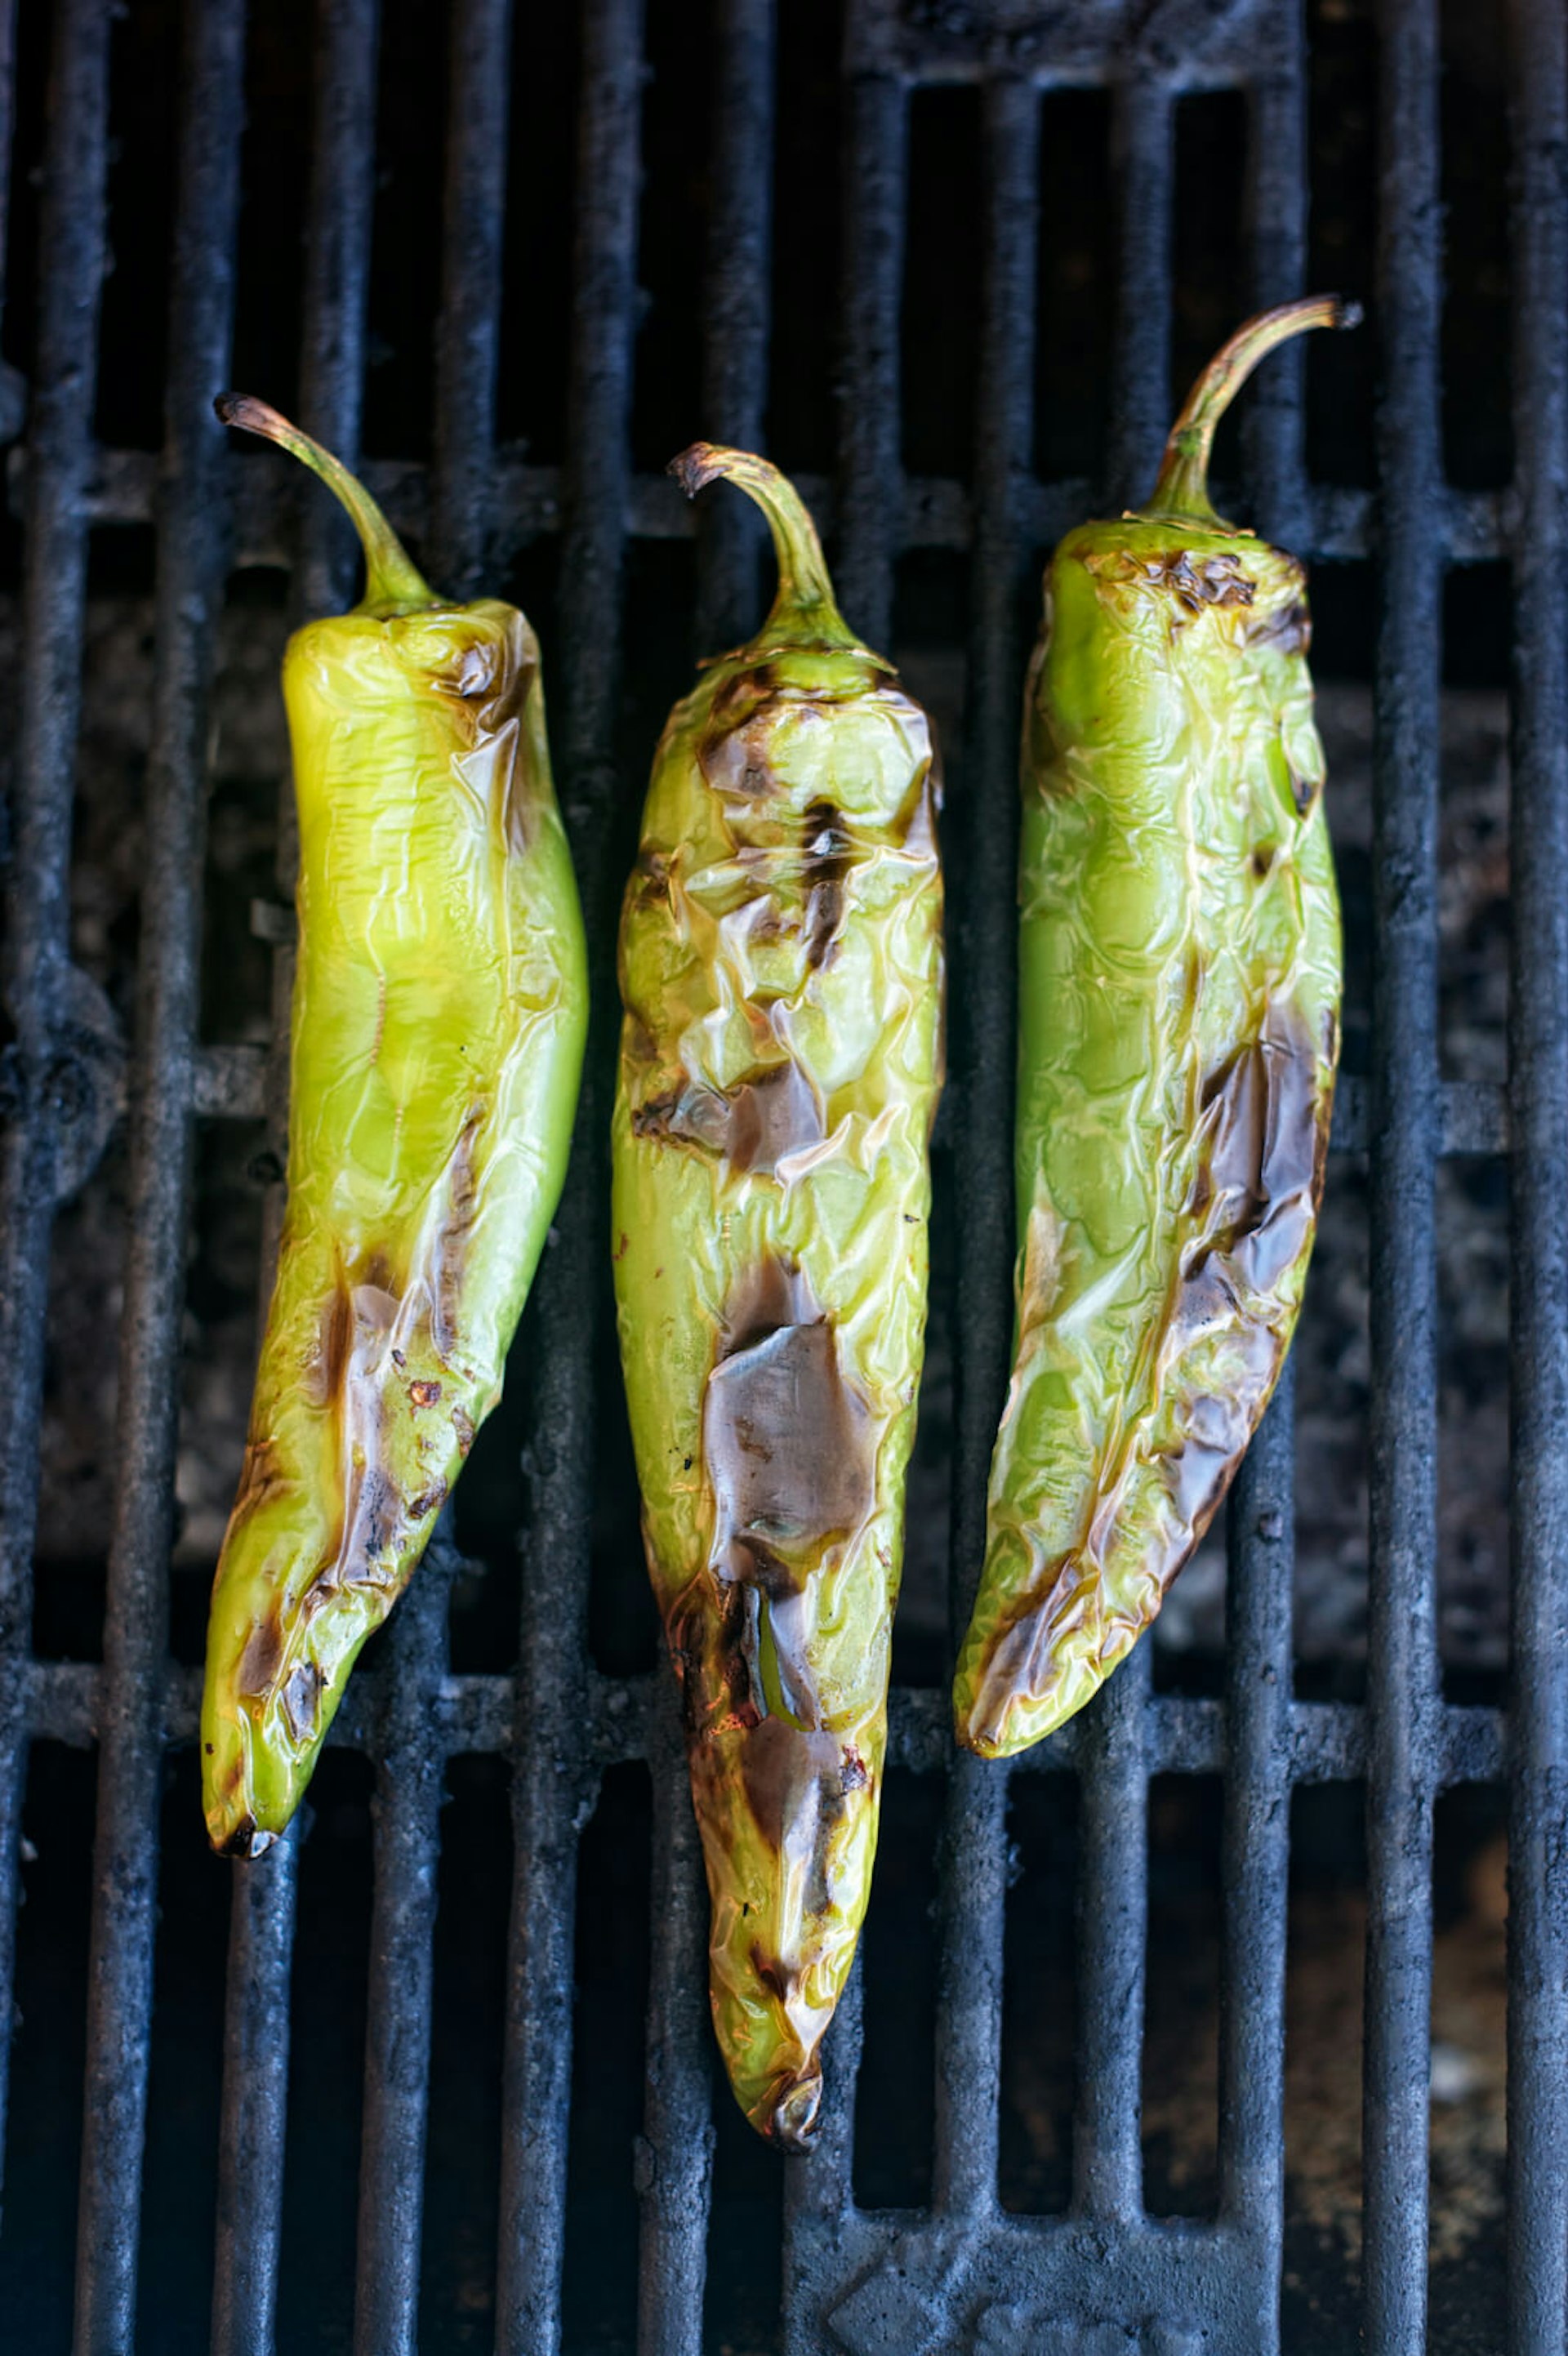 Roasted green chili on a griddle